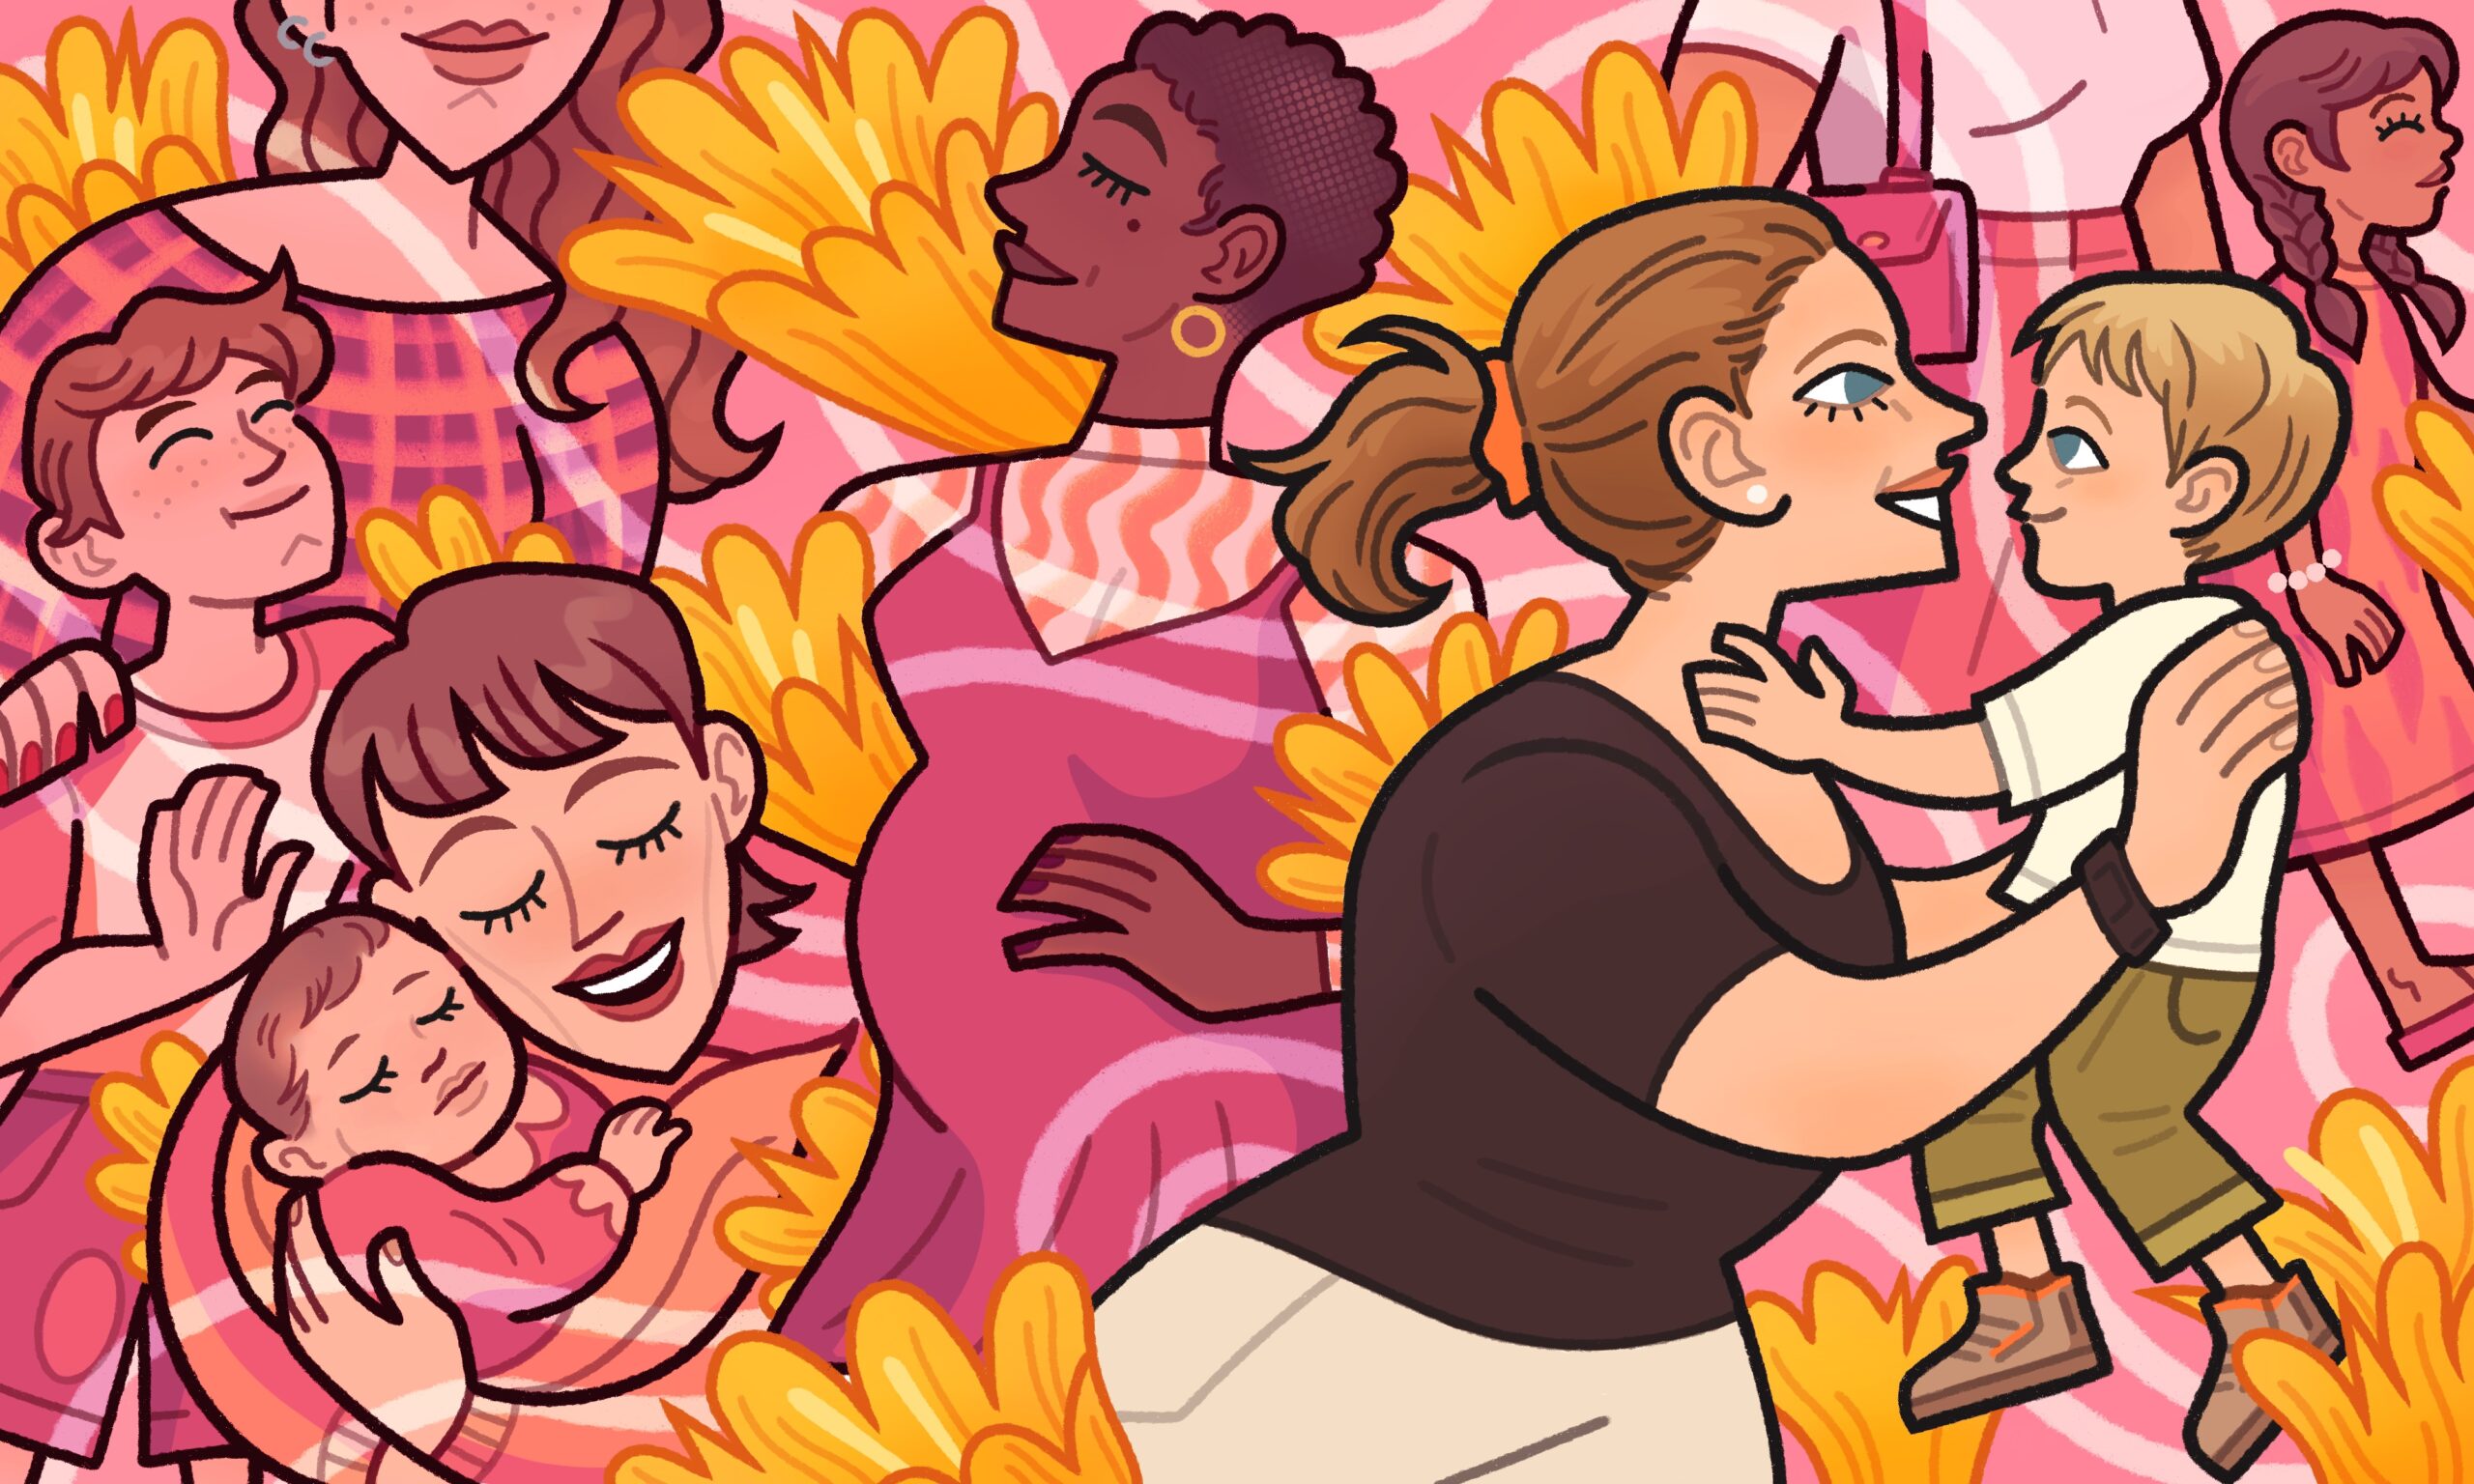 In the illustration, there is a group of warm and exuberant single mothers alongside—and in various stages—their children. In the right corner you can see Sara Lane and her son sharing a happy embrace. The piece has a lot of movement and is characterized with warm magentas, pinks, and peaches. Alongside the figures, there are large yellow flowers emerging in the background.